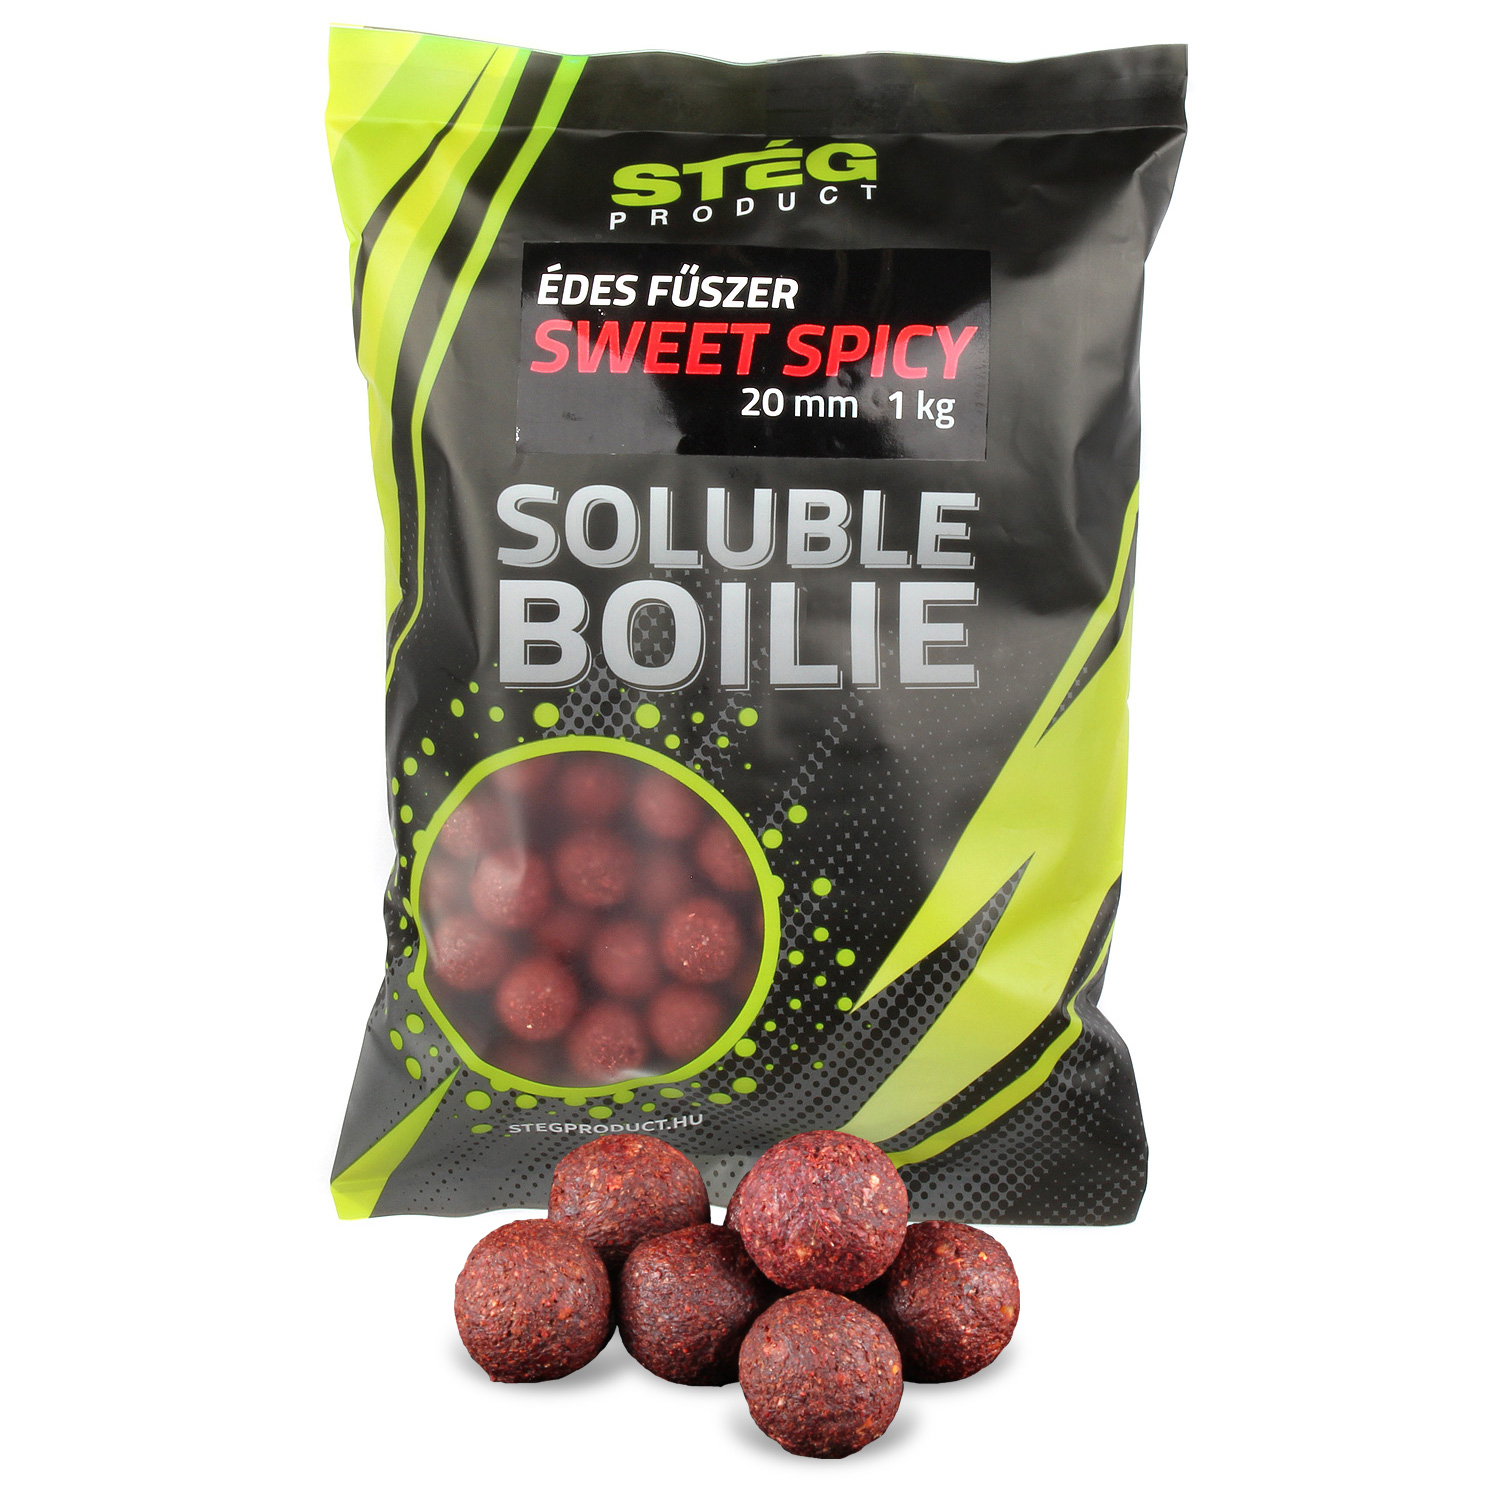 Stg Product Soluble Boilie 24mm Sweet Spicy 1kg